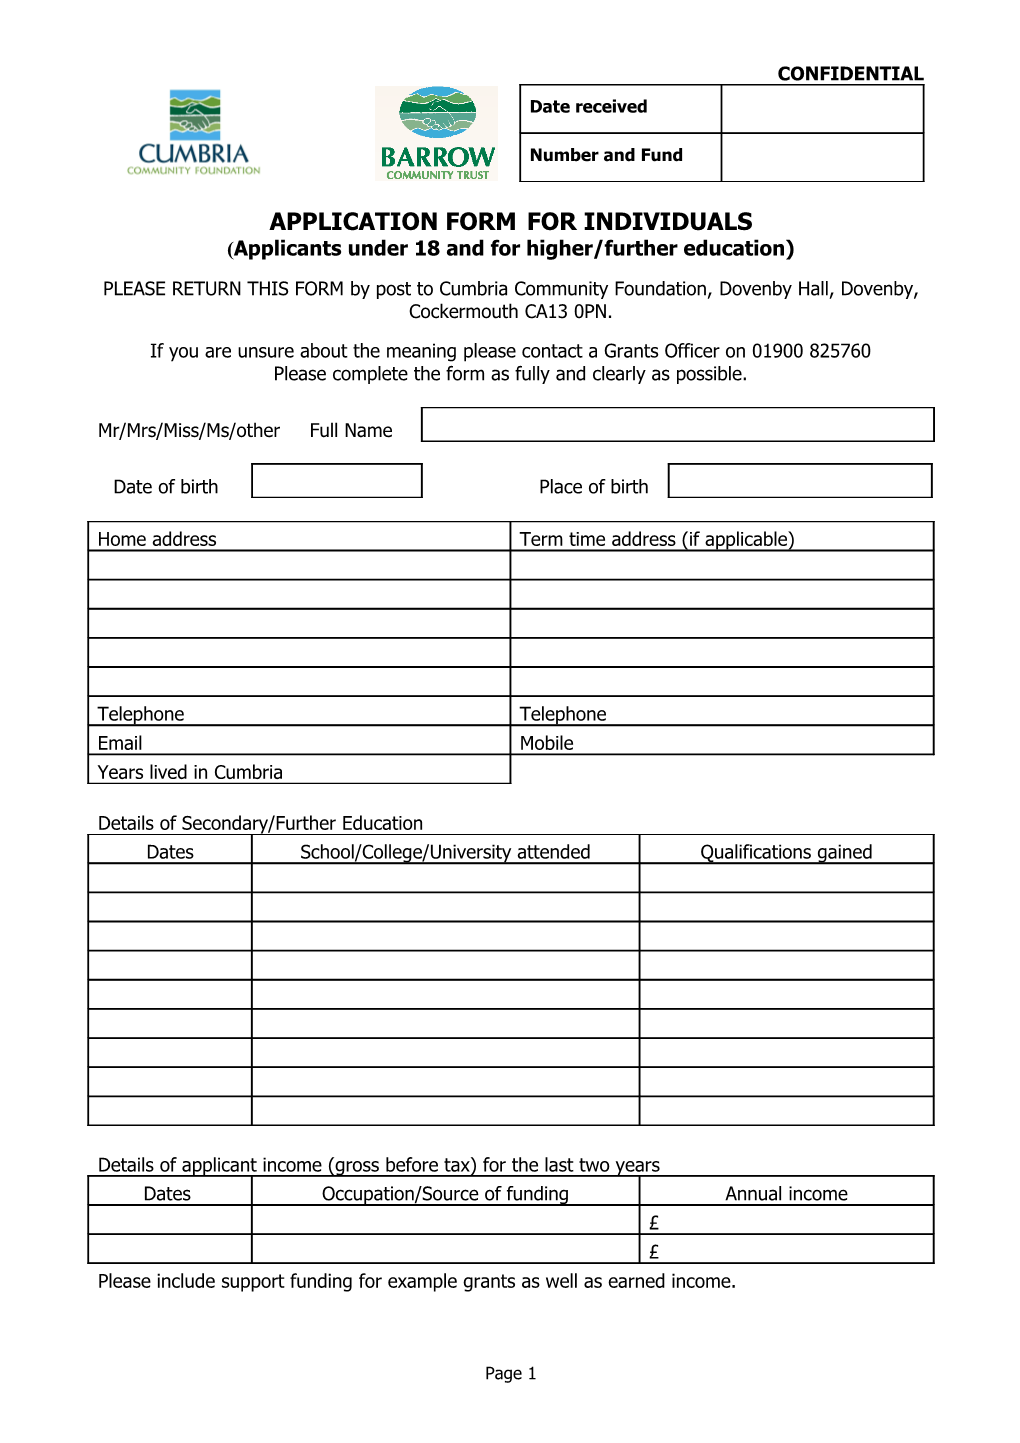 PLEASE RETURN THIS FORM by Post to Cumbria Community Foundation, Dovenby Hall, Dovenby